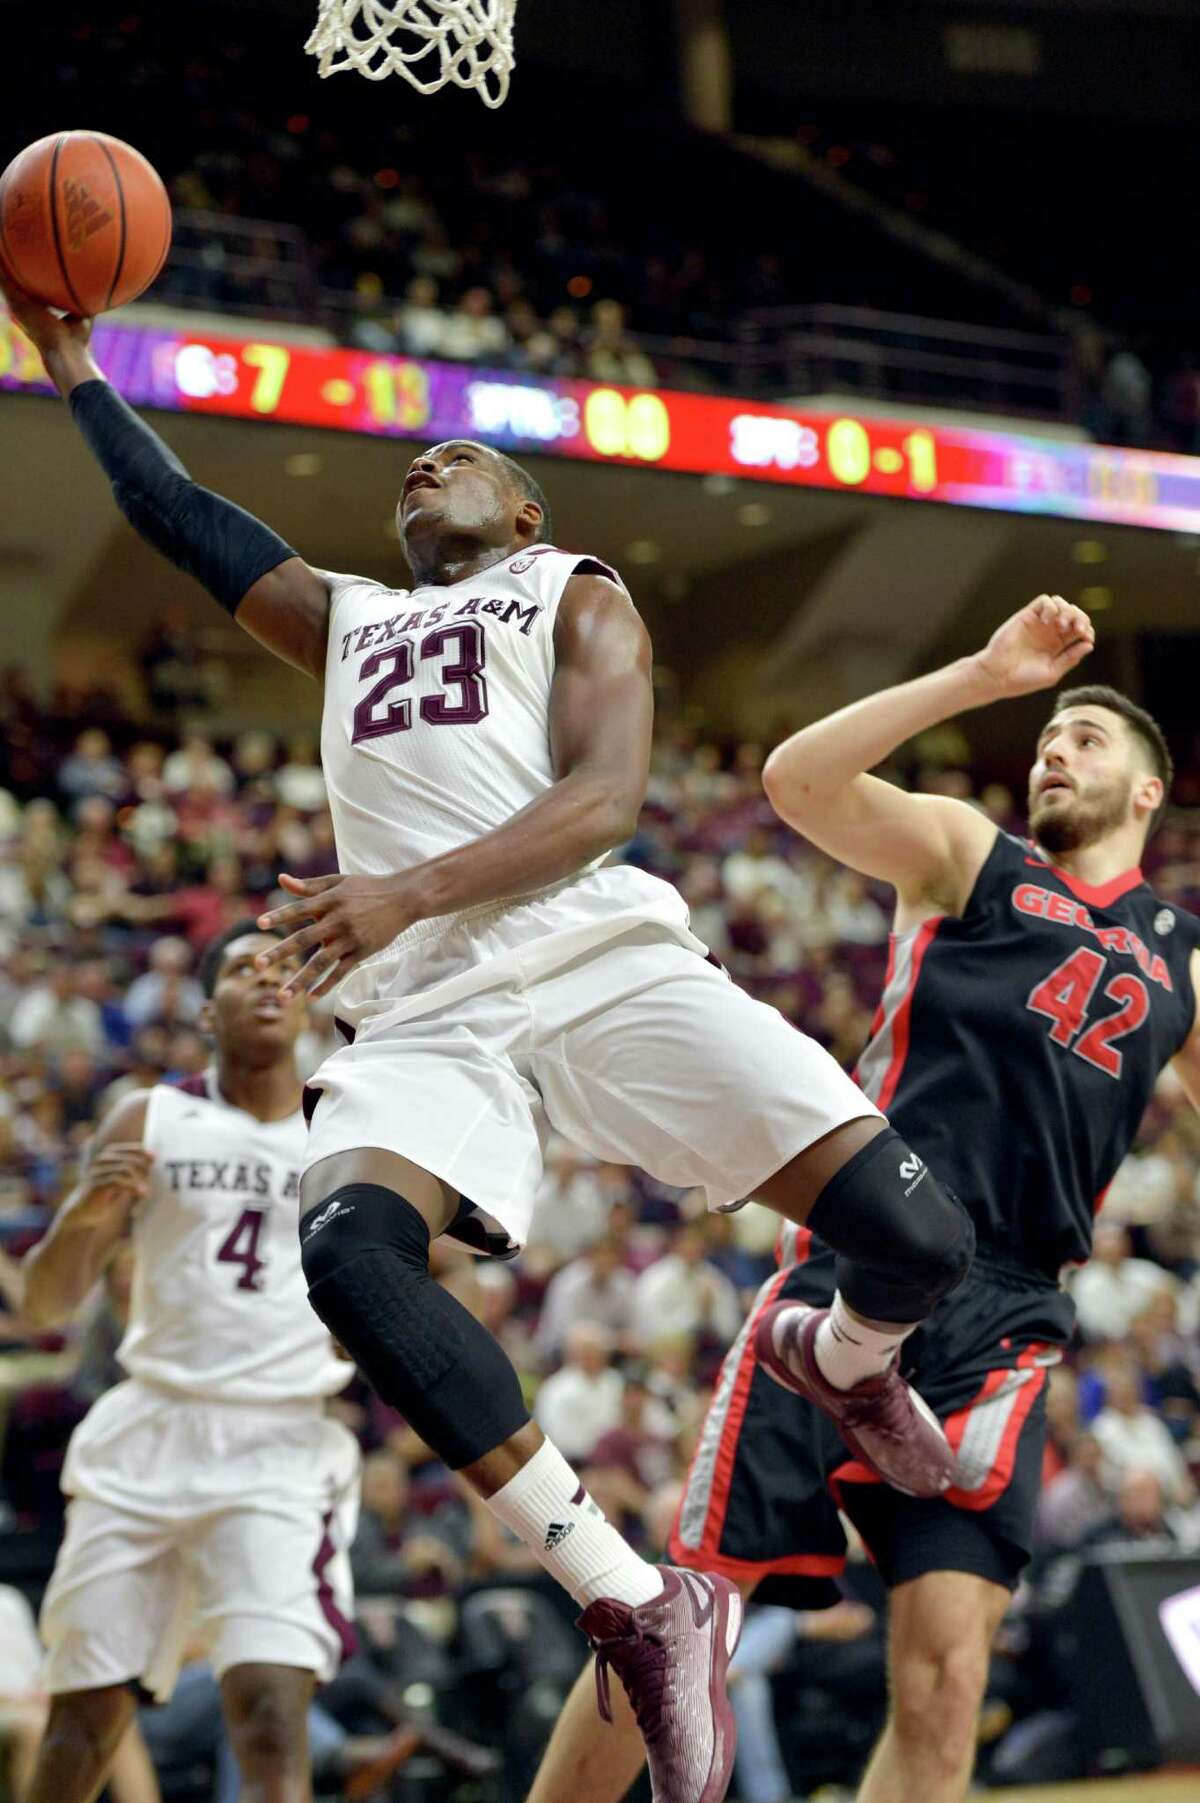 Texas A&M guard Danuel House (23) is aware the NCAA Tournament is around the corner but insists the Aggies simply try to worry about their next game.